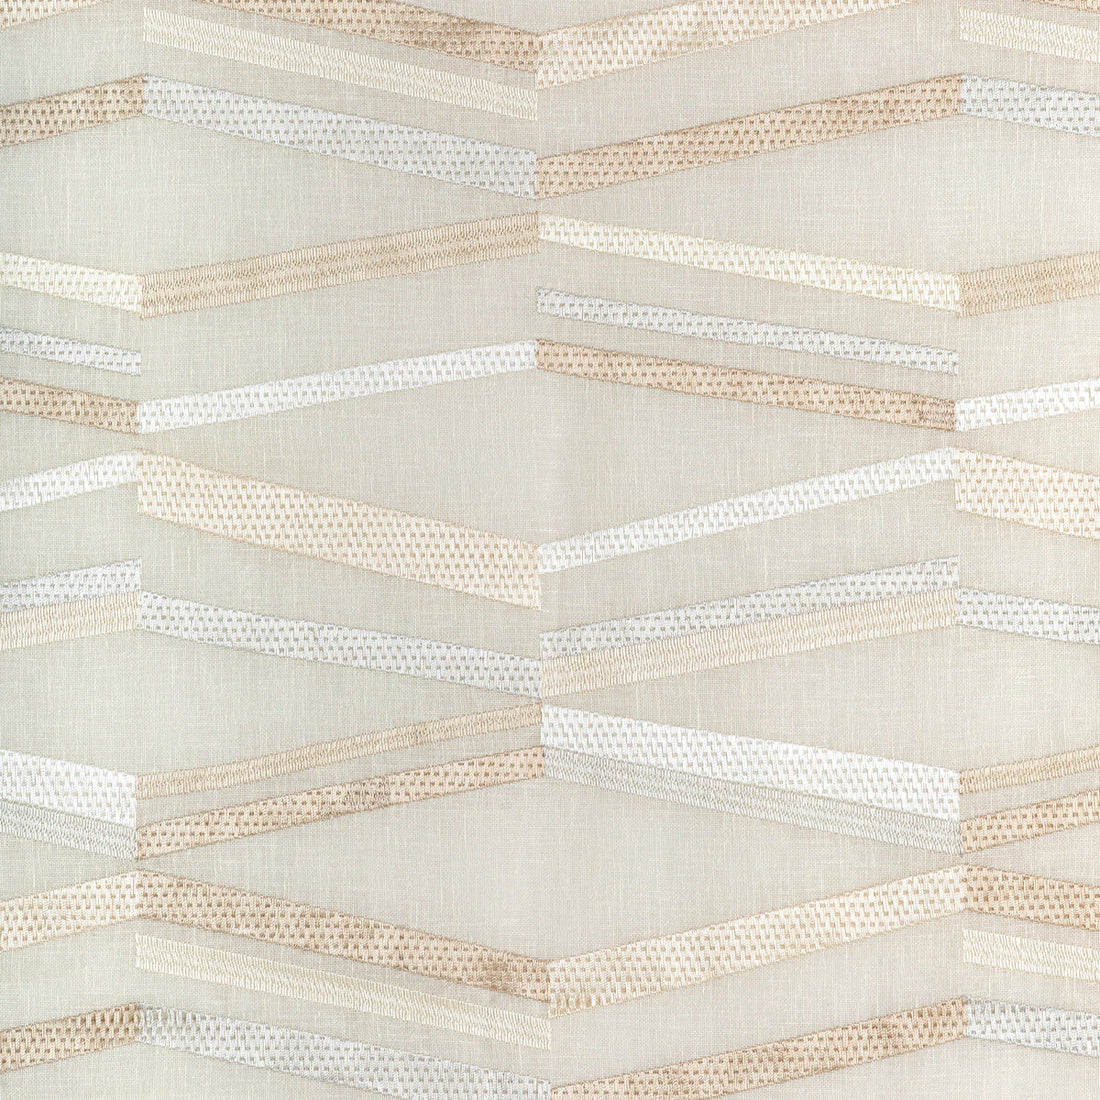 Parabola fabric in cream color - pattern 4248.116.0 - by Kravet Couture in the Modern Luxe III collection